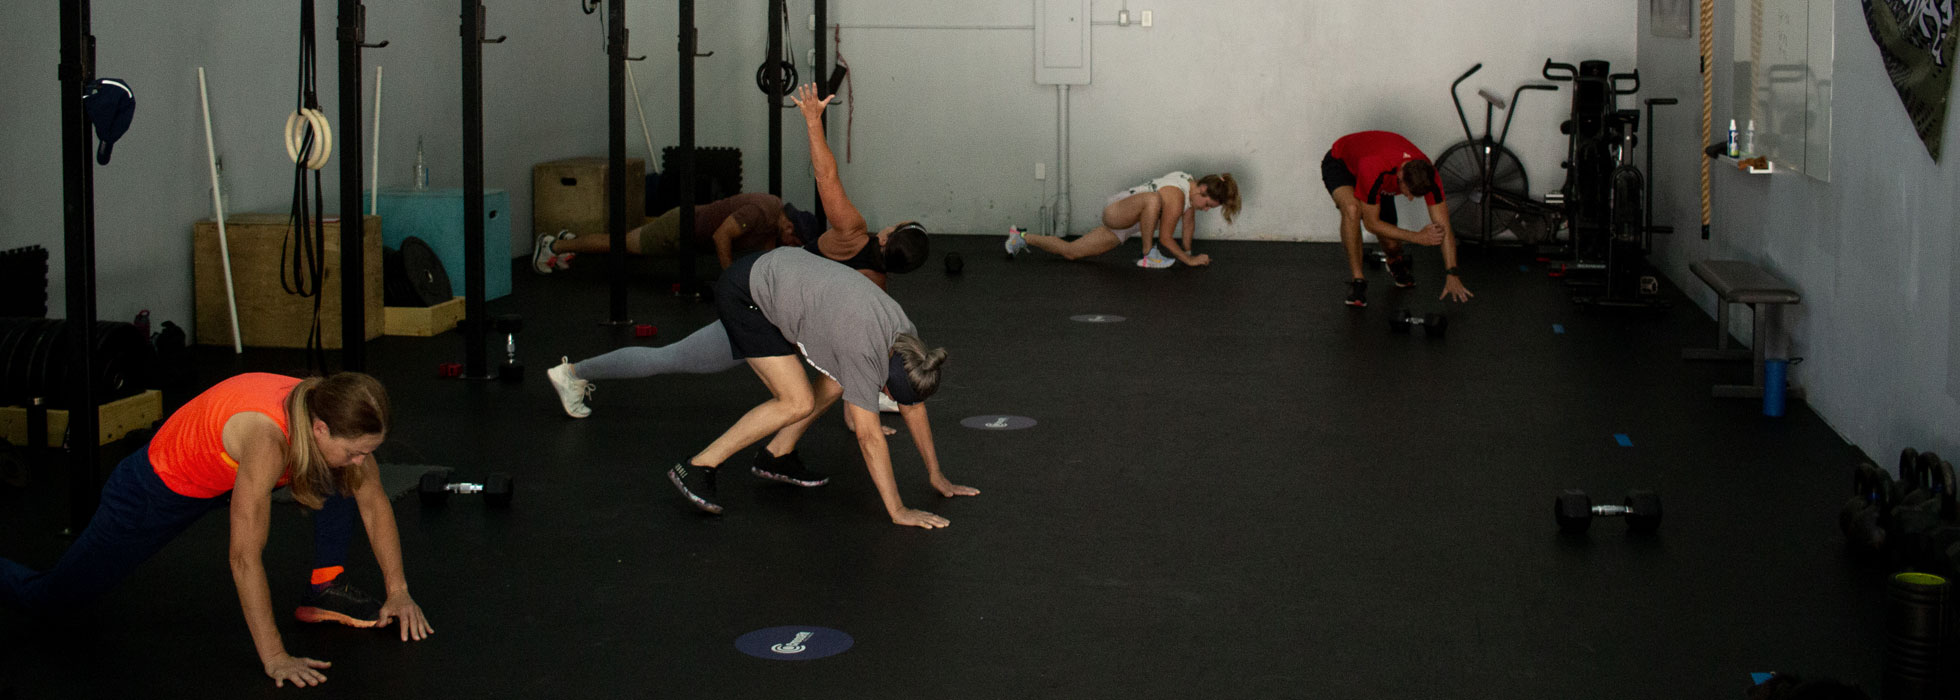 CrossFit Training in Chilliwack, BC Canada close to Sardis, Vedder, Vedder Crossing, Garrison, and Garrison Crossing